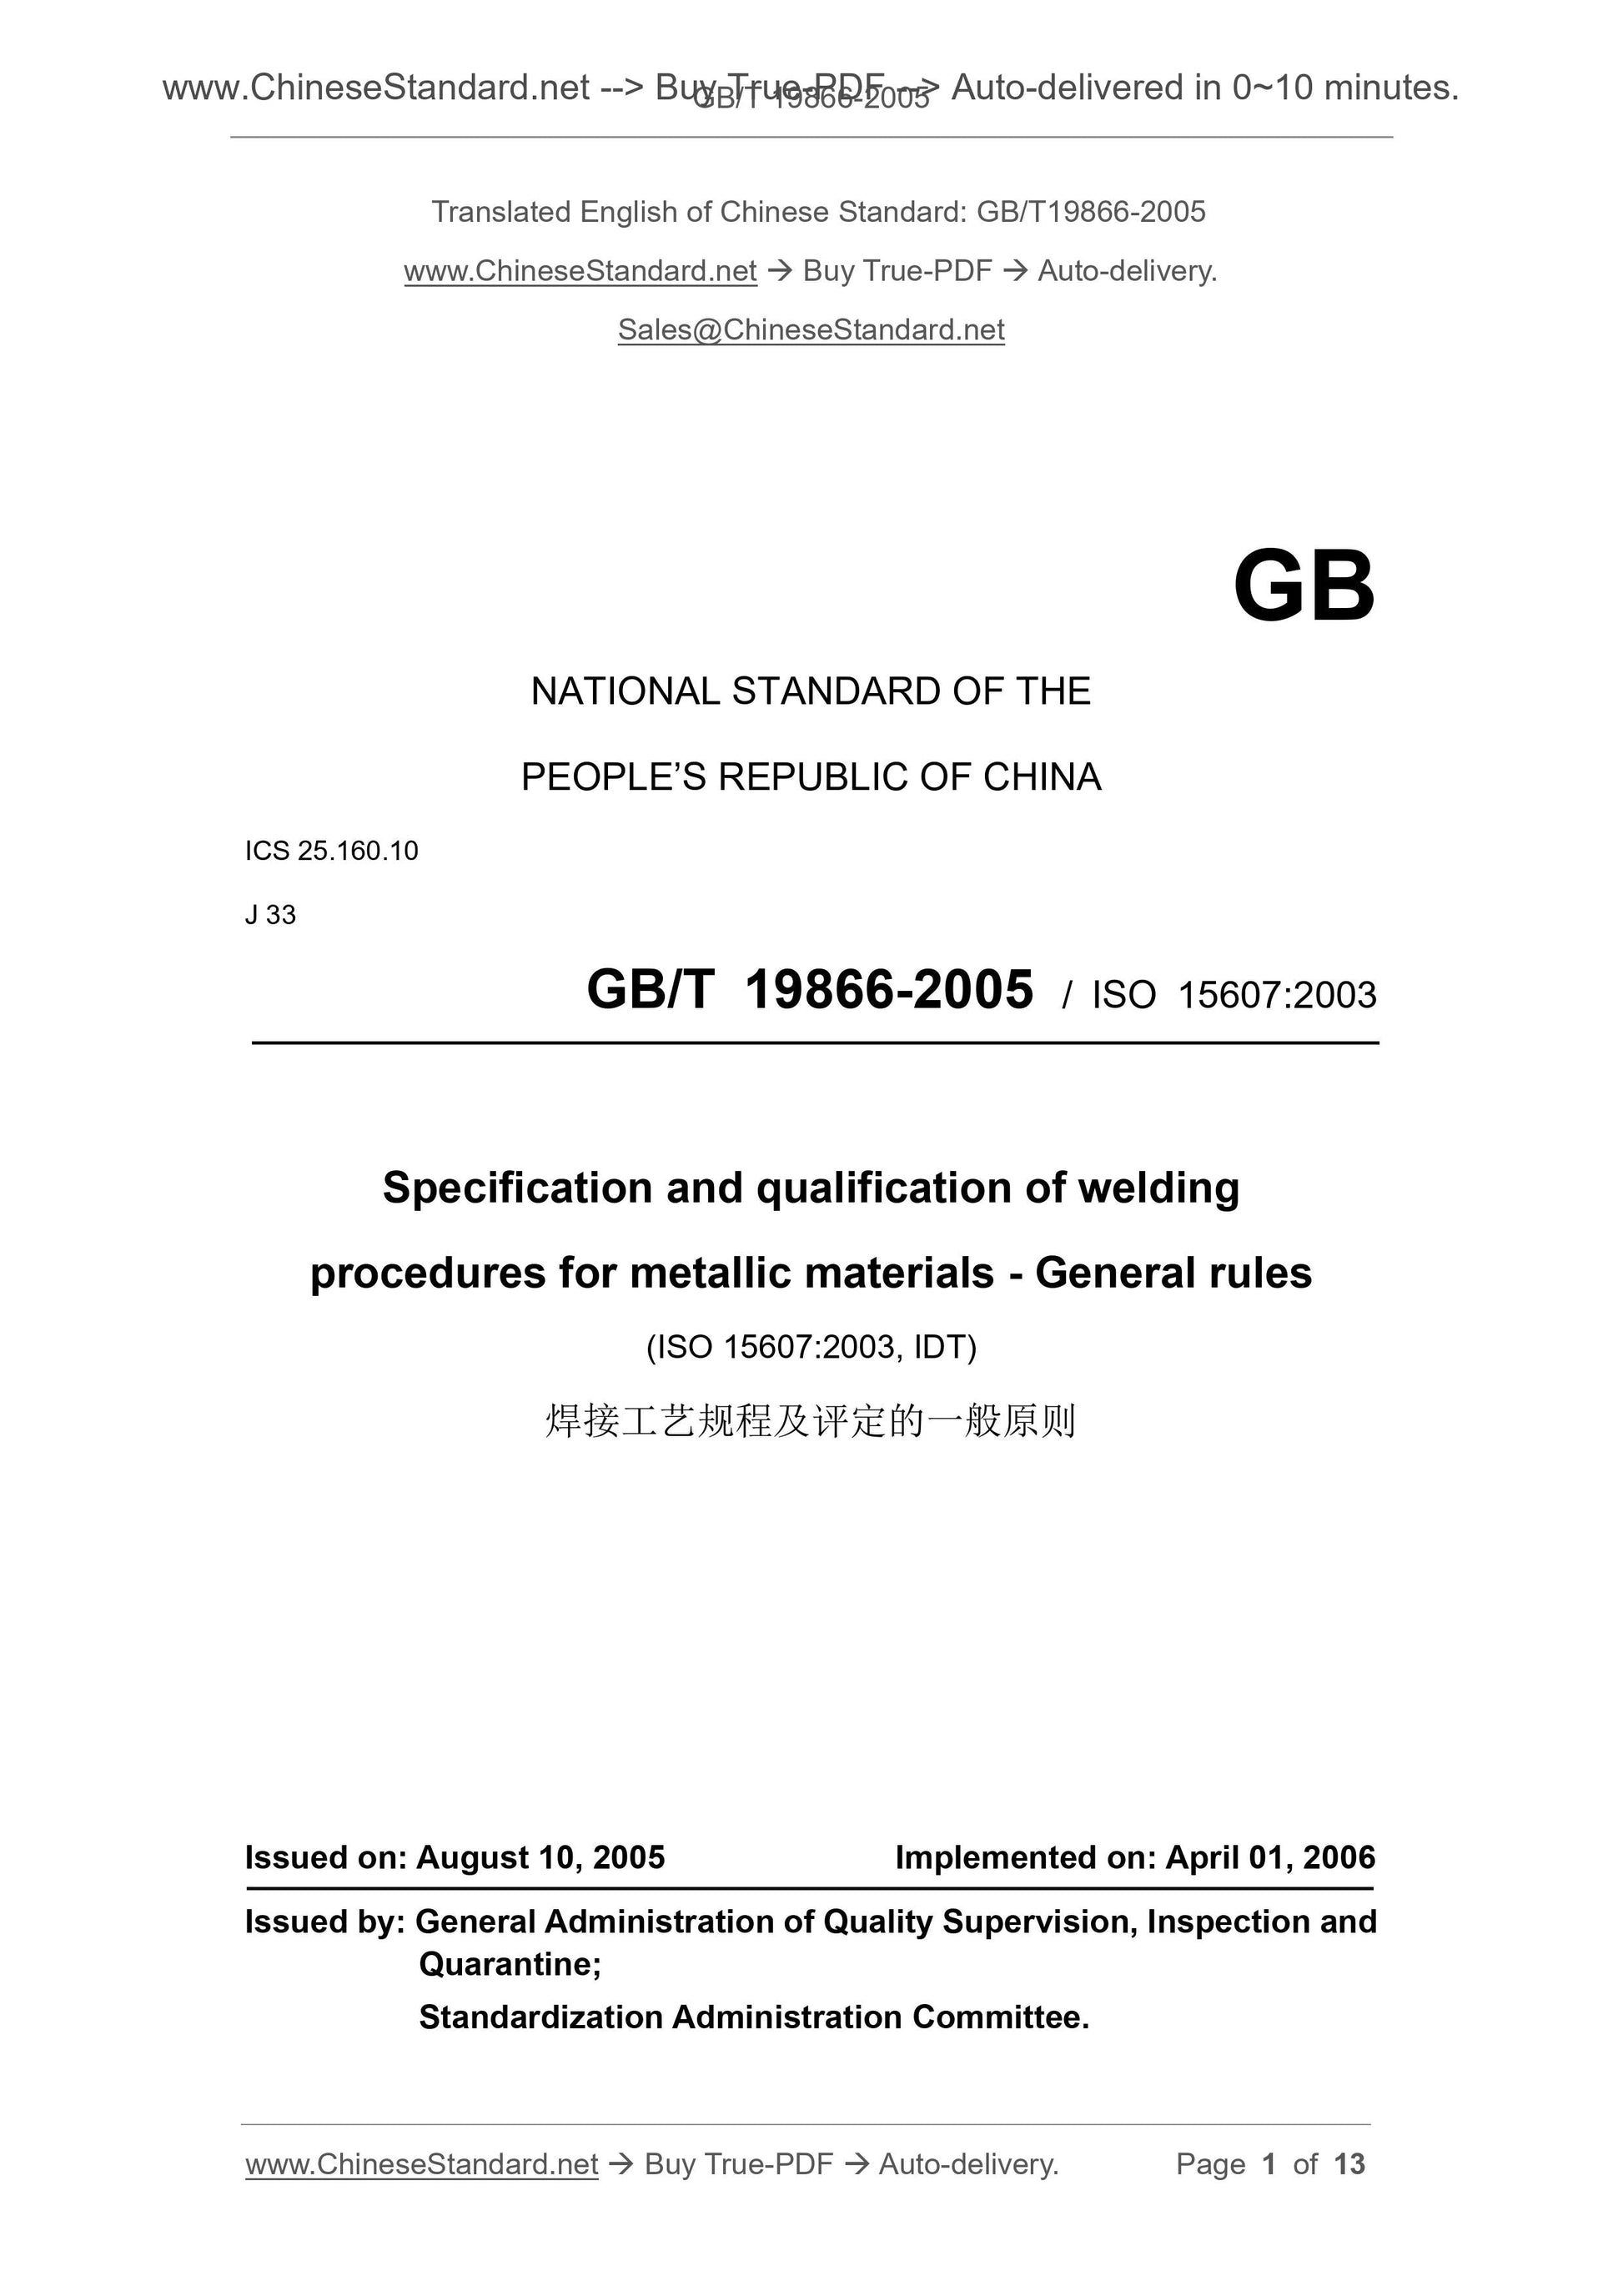 GB/T 19866-2005 Page 1